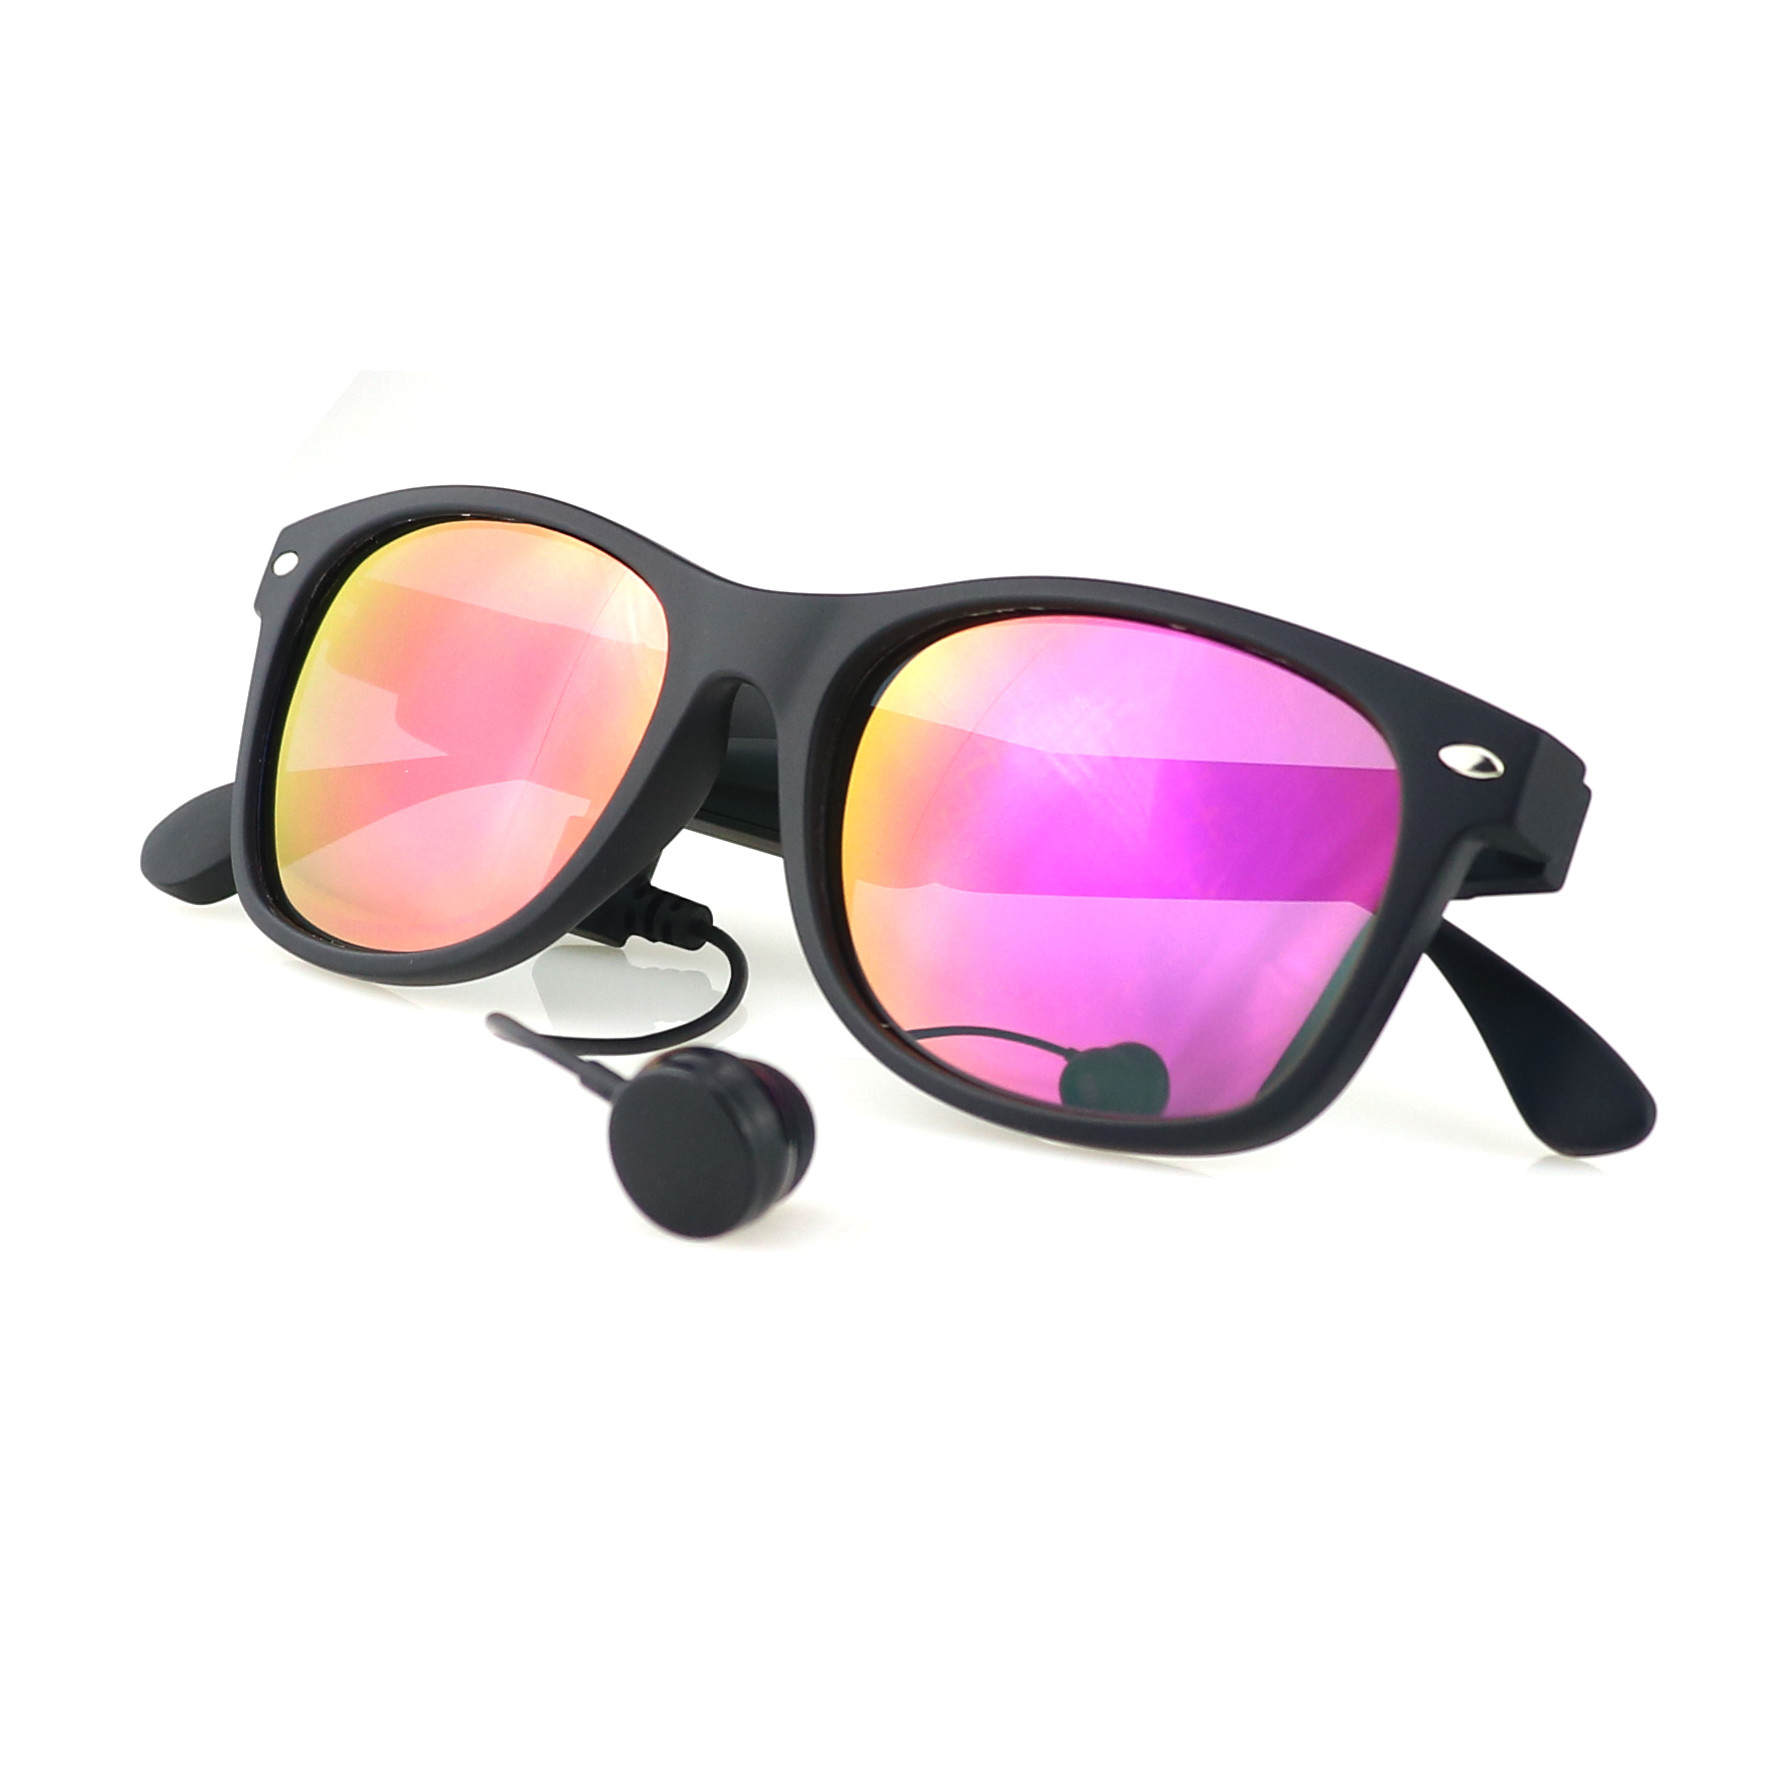 China CE FCC RoHS UV400 USB Chargeable Bluetooth Sunglasses with Earphone for Adult factory